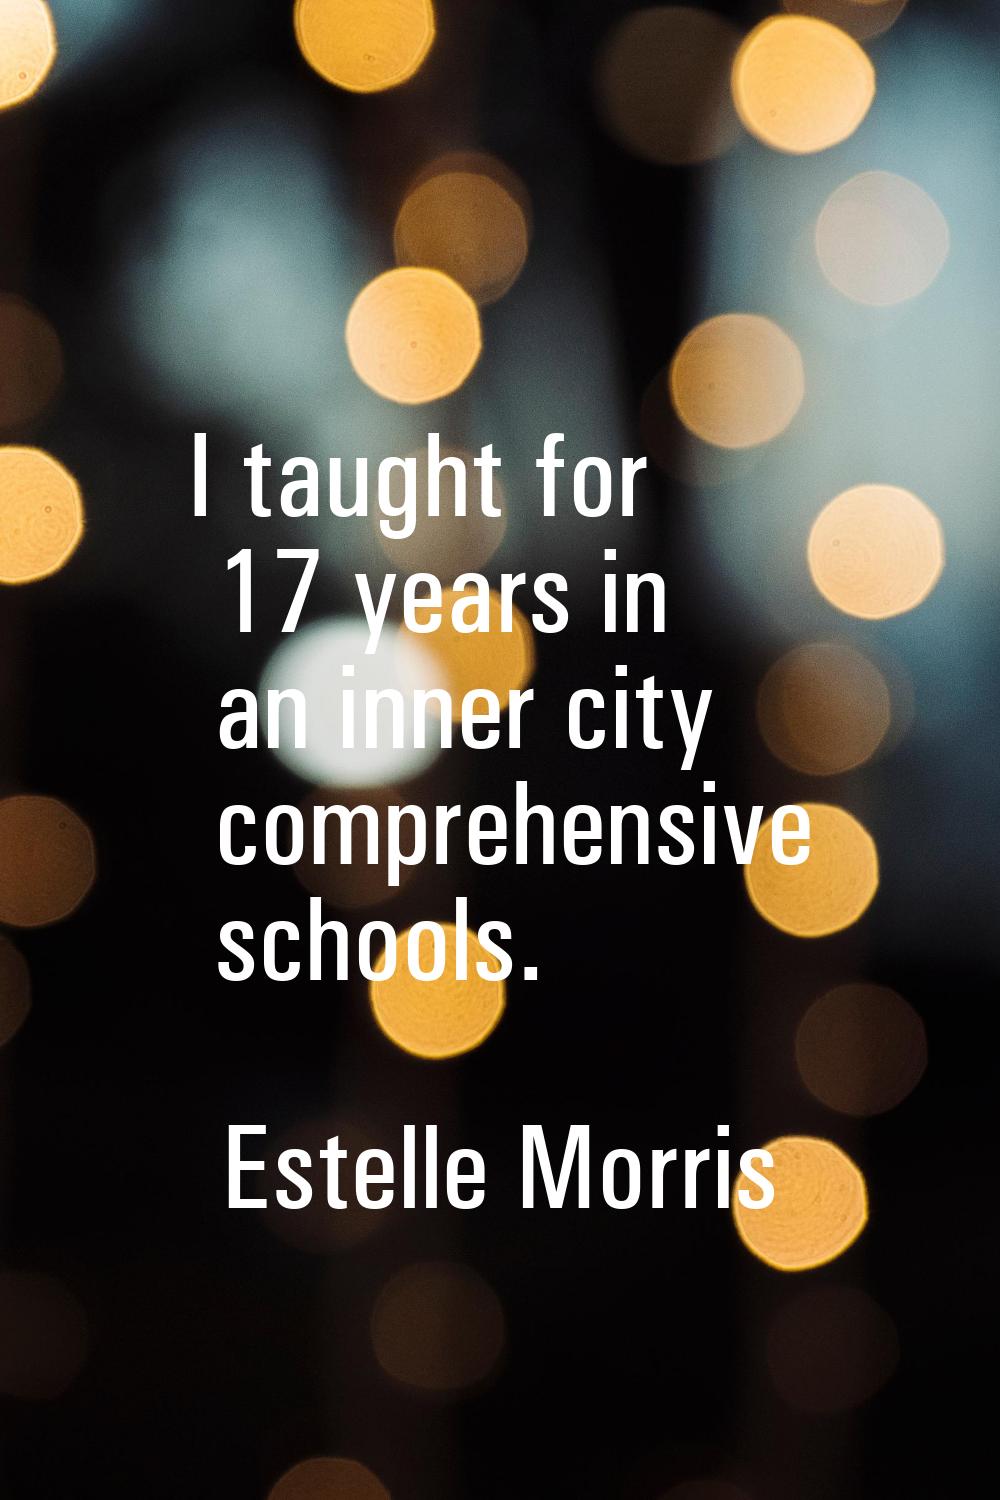 I taught for 17 years in an inner city comprehensive schools.